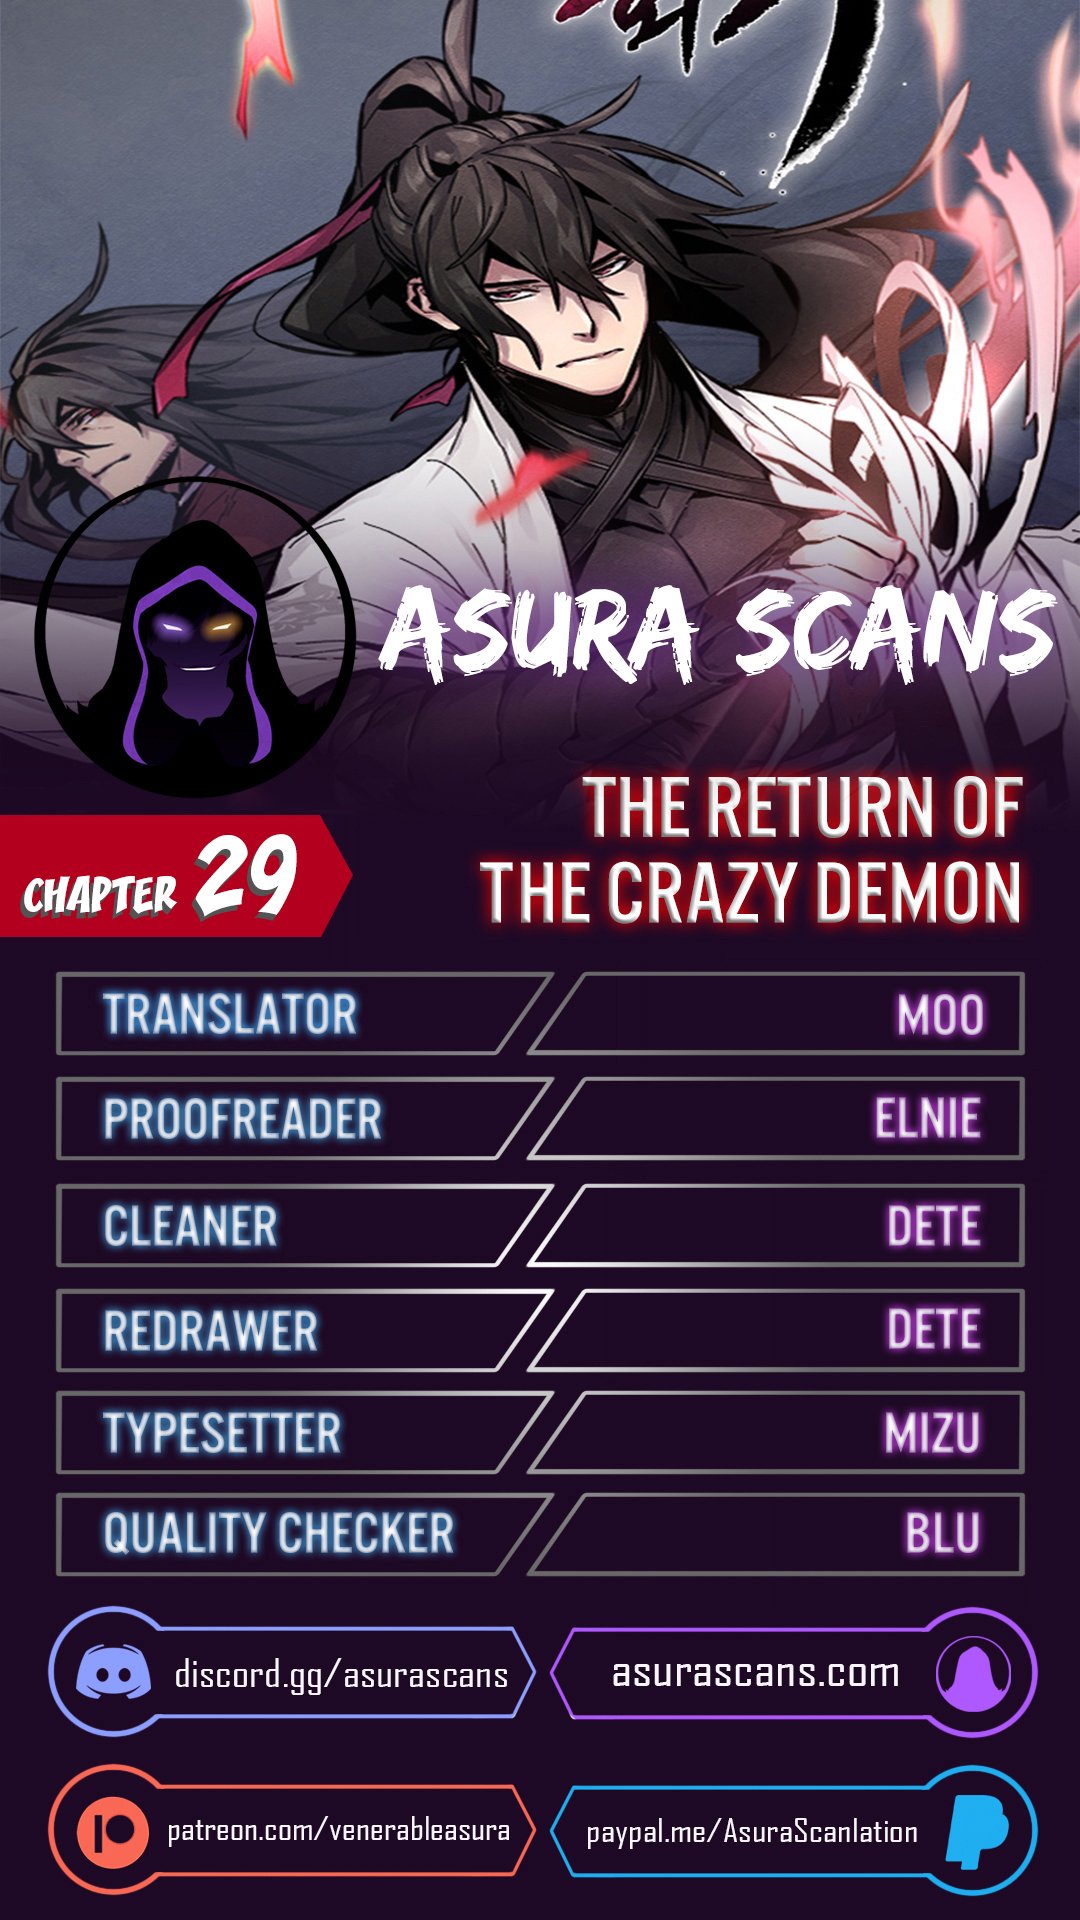 The Return of the Crazy Demon - Chapter 18570 - Image 1